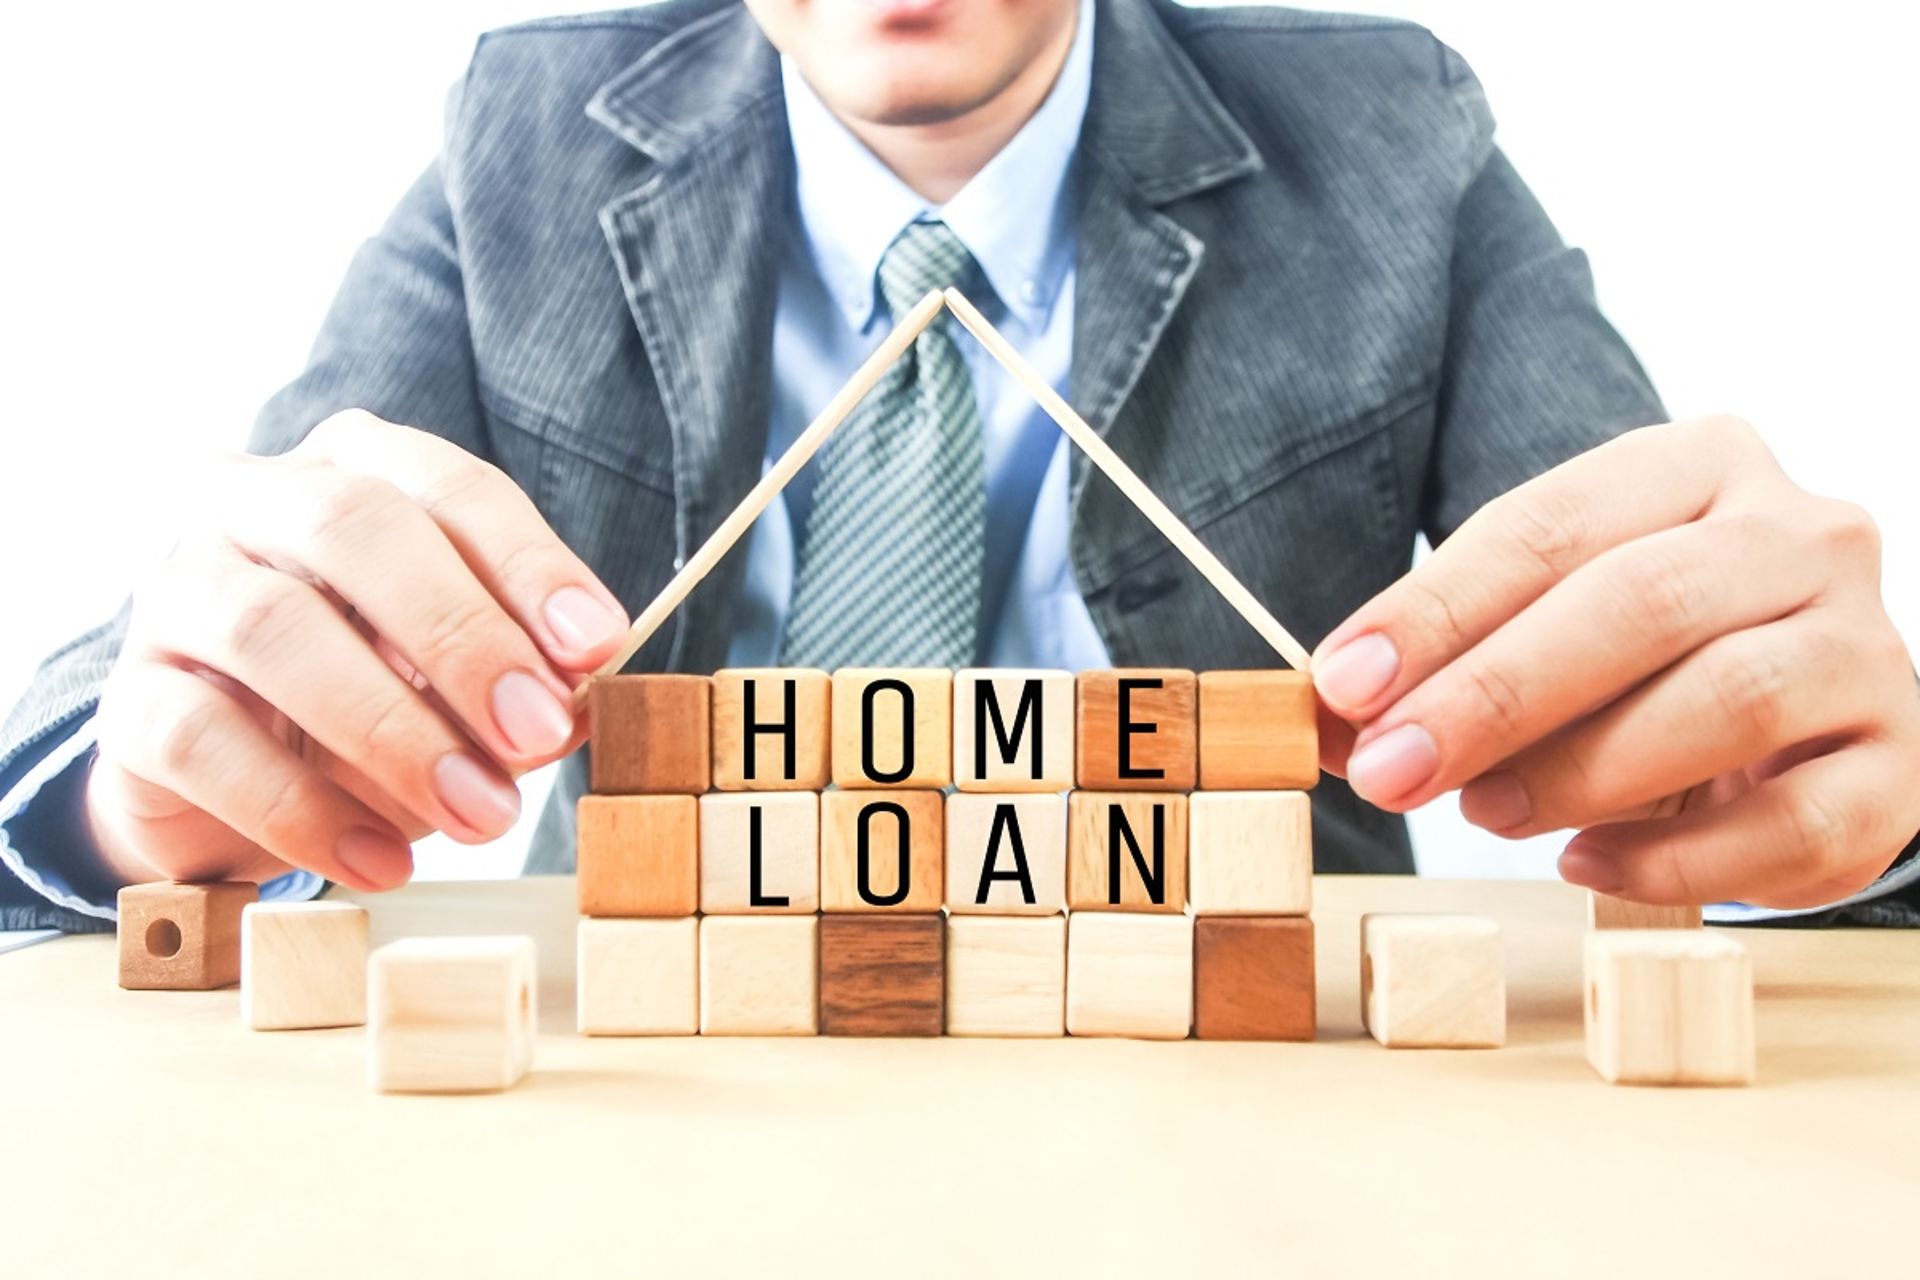 What Can Go Wrong With a Home Loan?